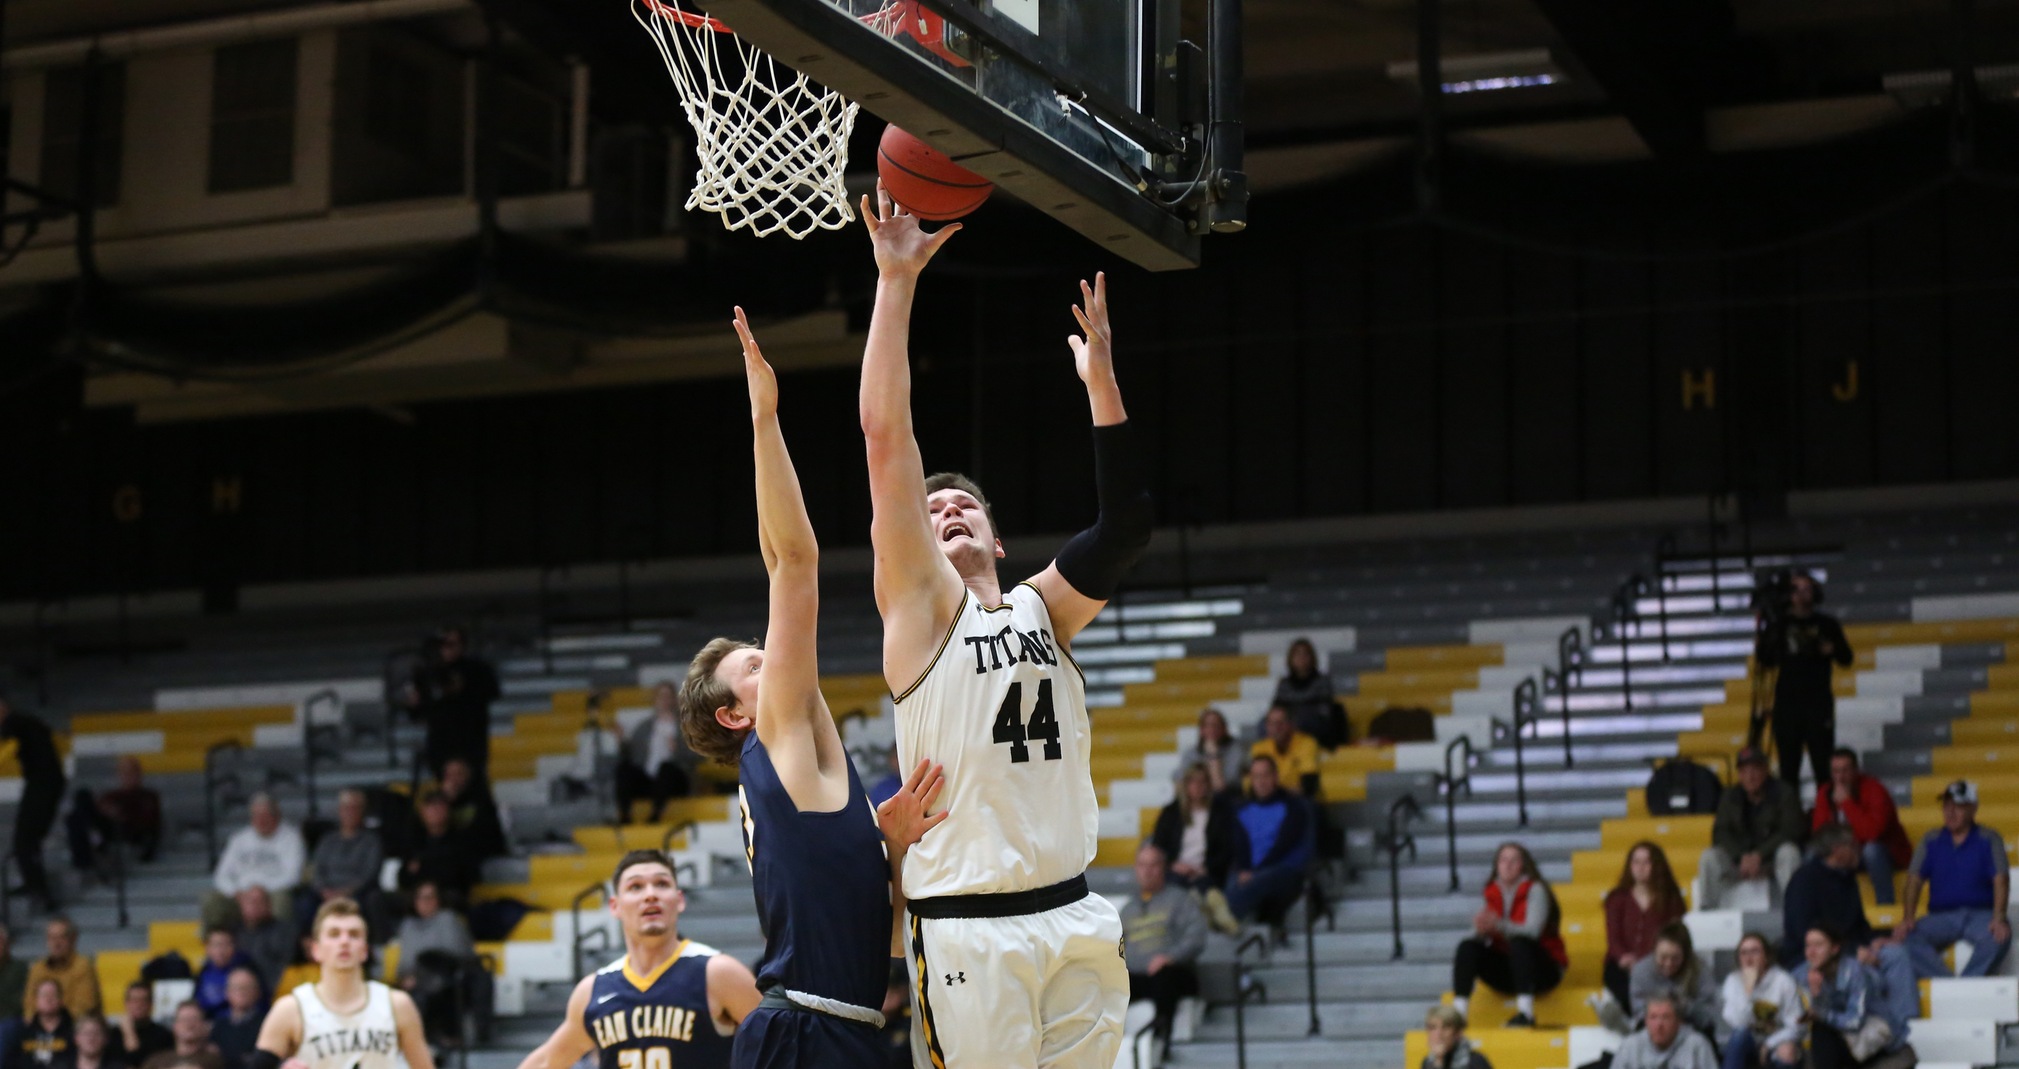 Jack Flynn scored 25 points, including 11 on free throws, and grabbed eight rebounds against the Blugolds.